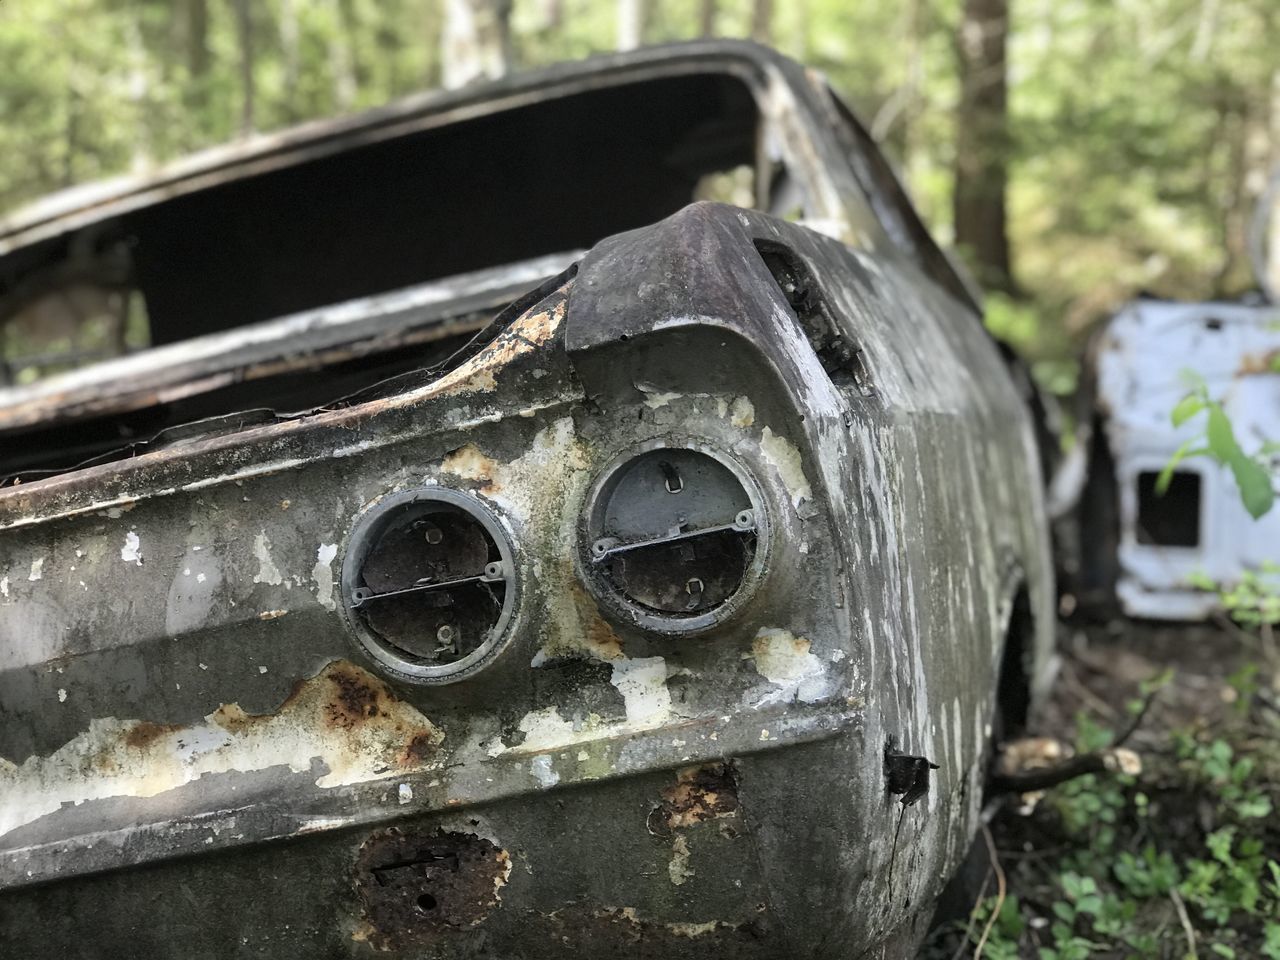 car, abandoned, vehicle, damaged, old, wheel, rundown, metal, mode of transportation, no people, rusty, deterioration, auto part, decline, motor vehicle, close-up, transportation, day, automotive exterior, focus on foreground, nature, weathered, bad condition, outdoors, broken, land vehicle, plant